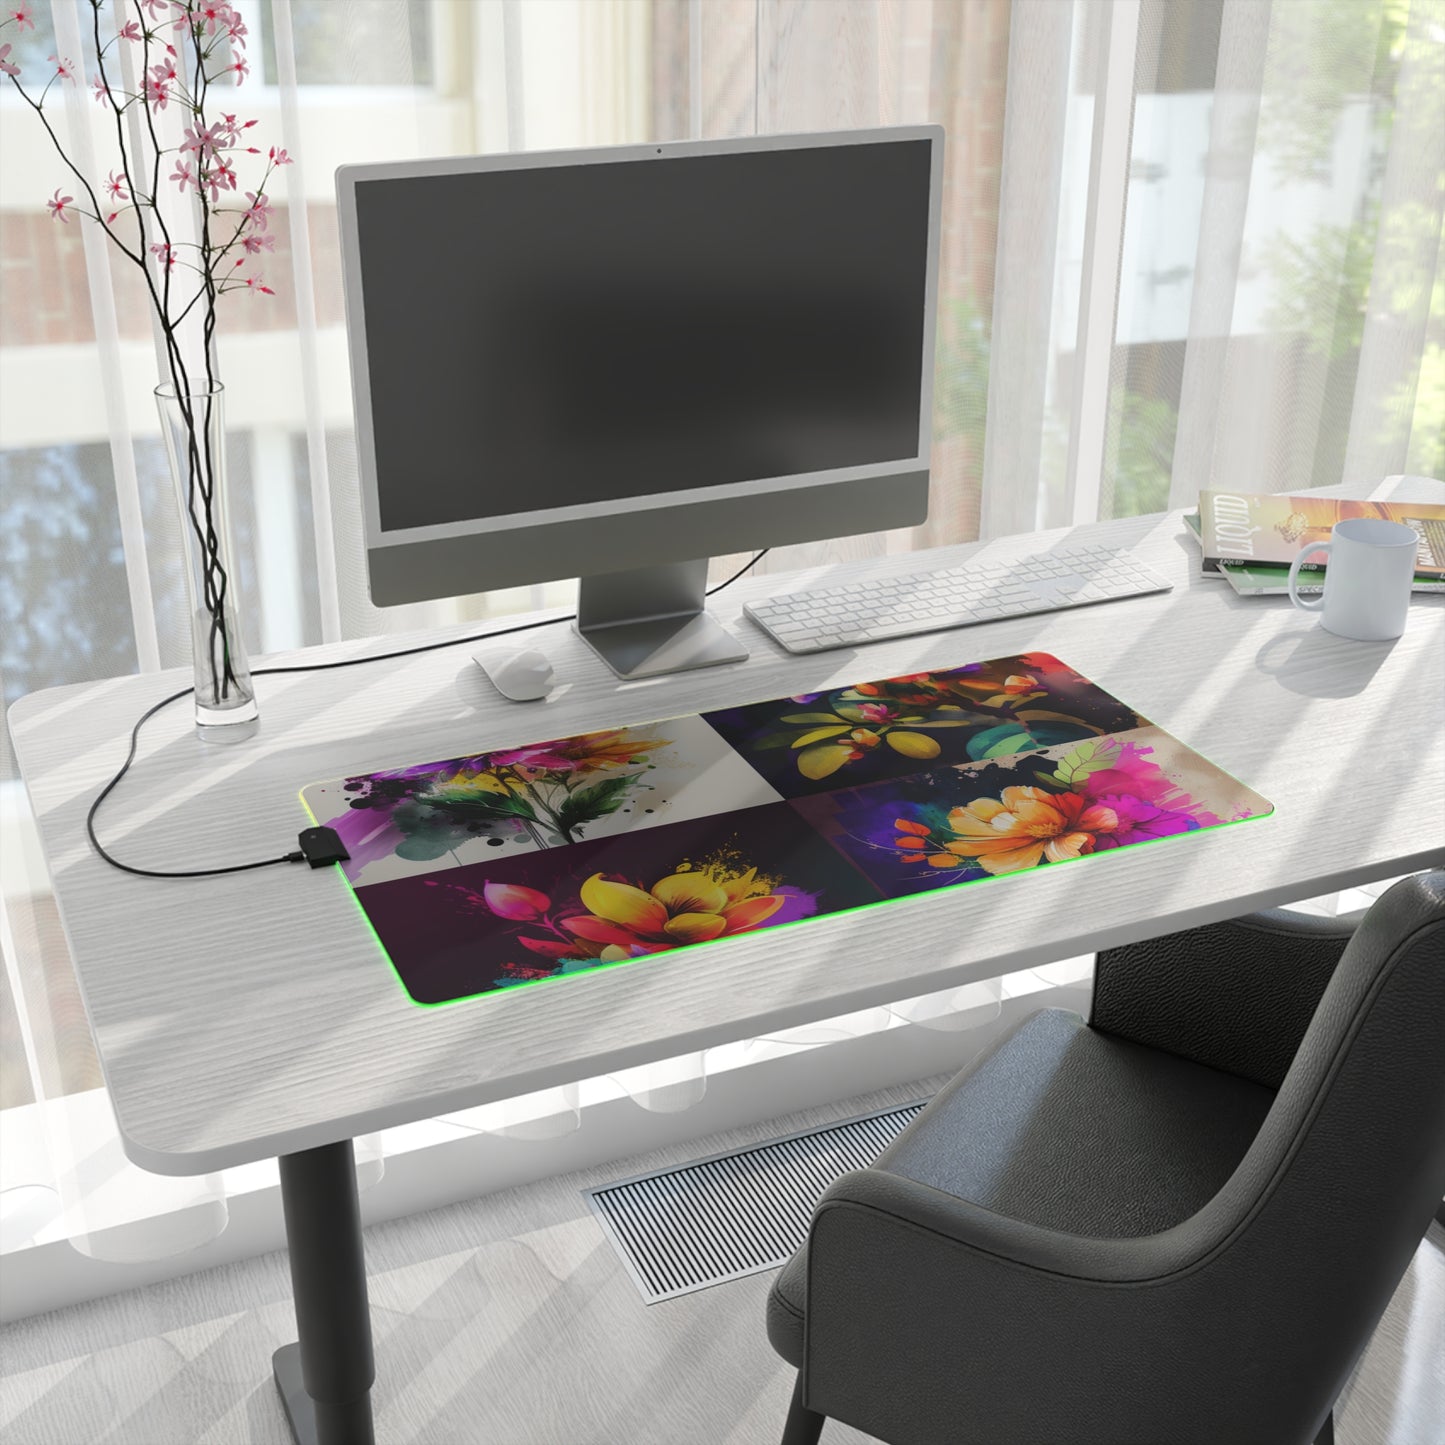 LED Gaming Mouse Pad Bright Spring Flowers 5